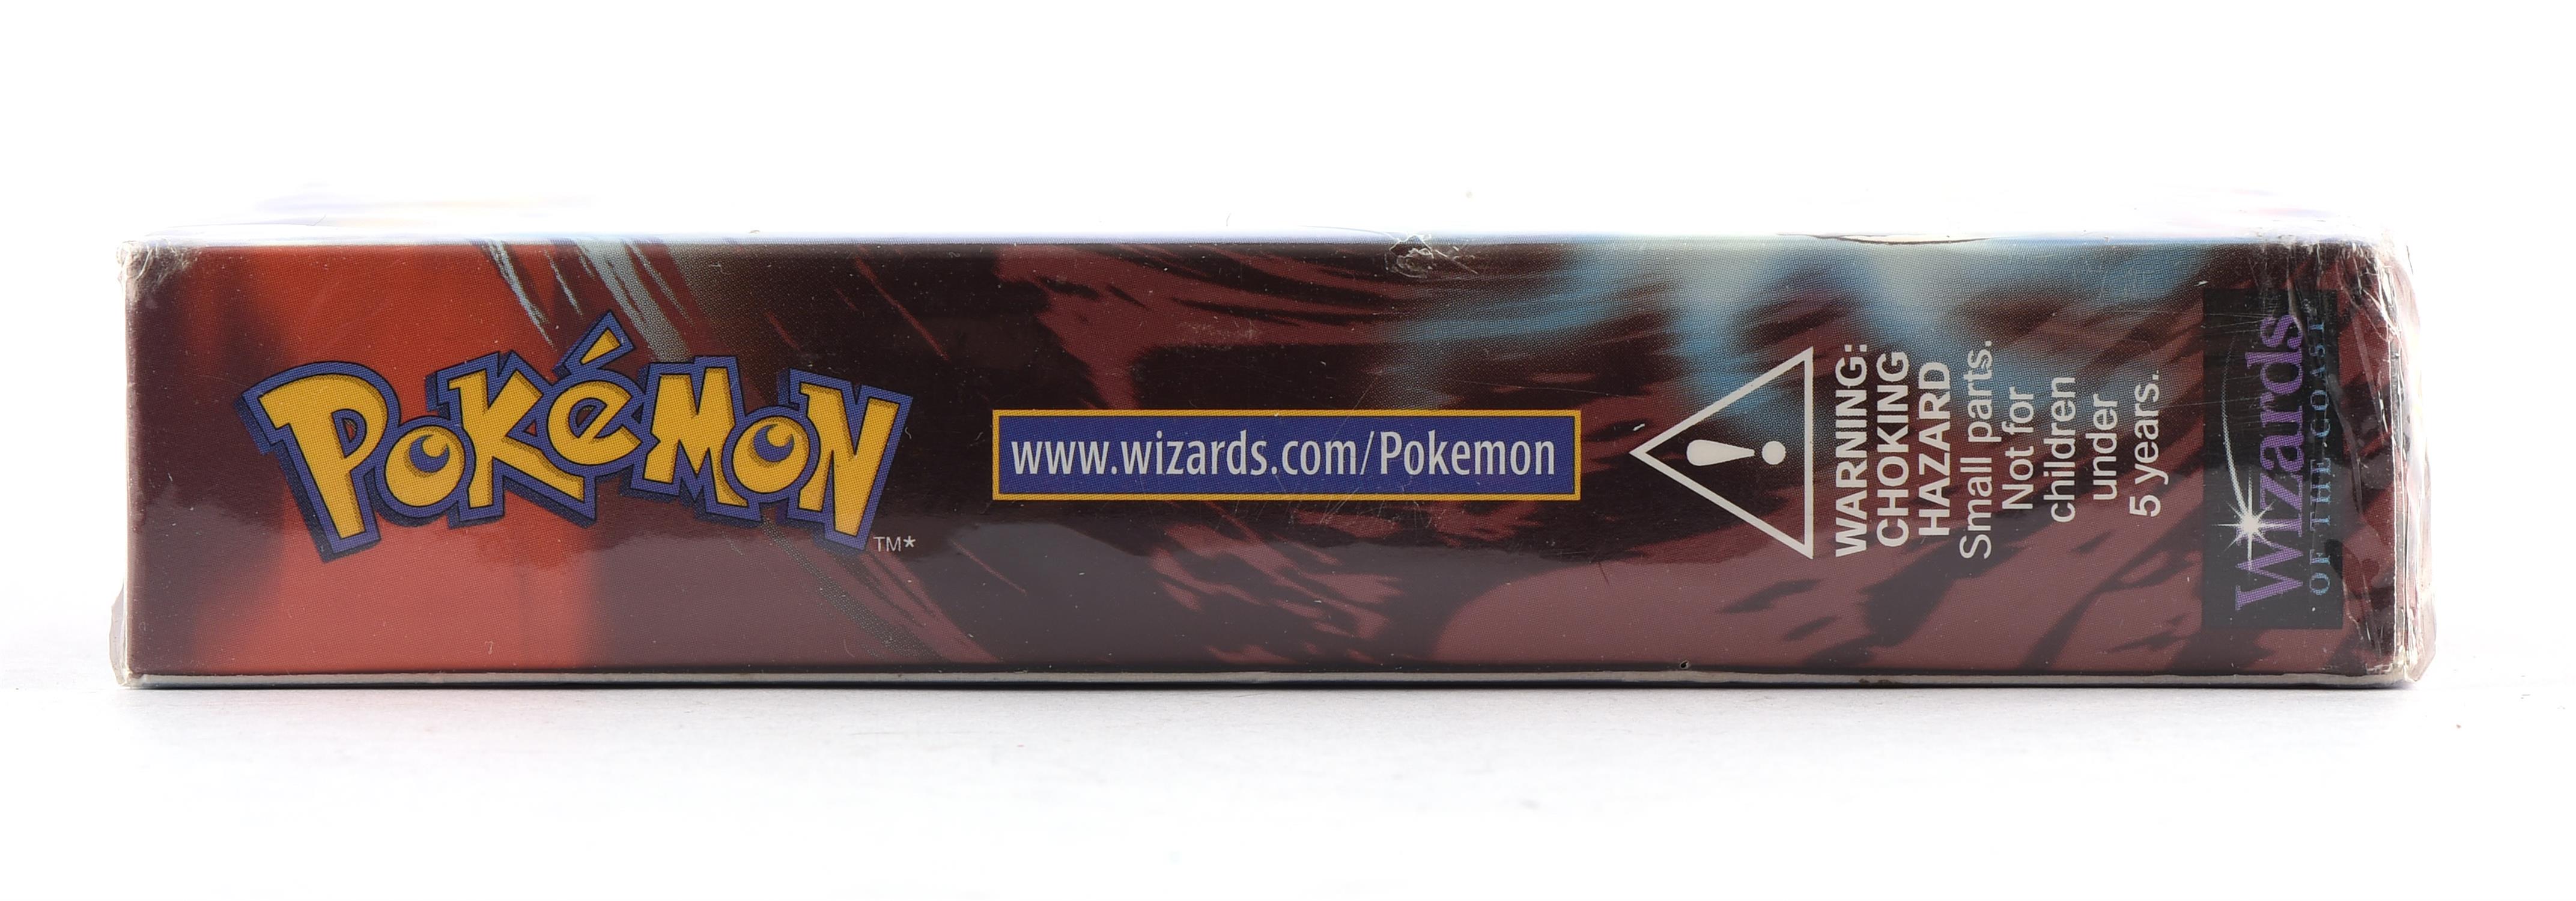 Pokemon TCG. Jungle Water Blast Theme Deck, sealed in original packaging. This lot contains a - Image 5 of 7